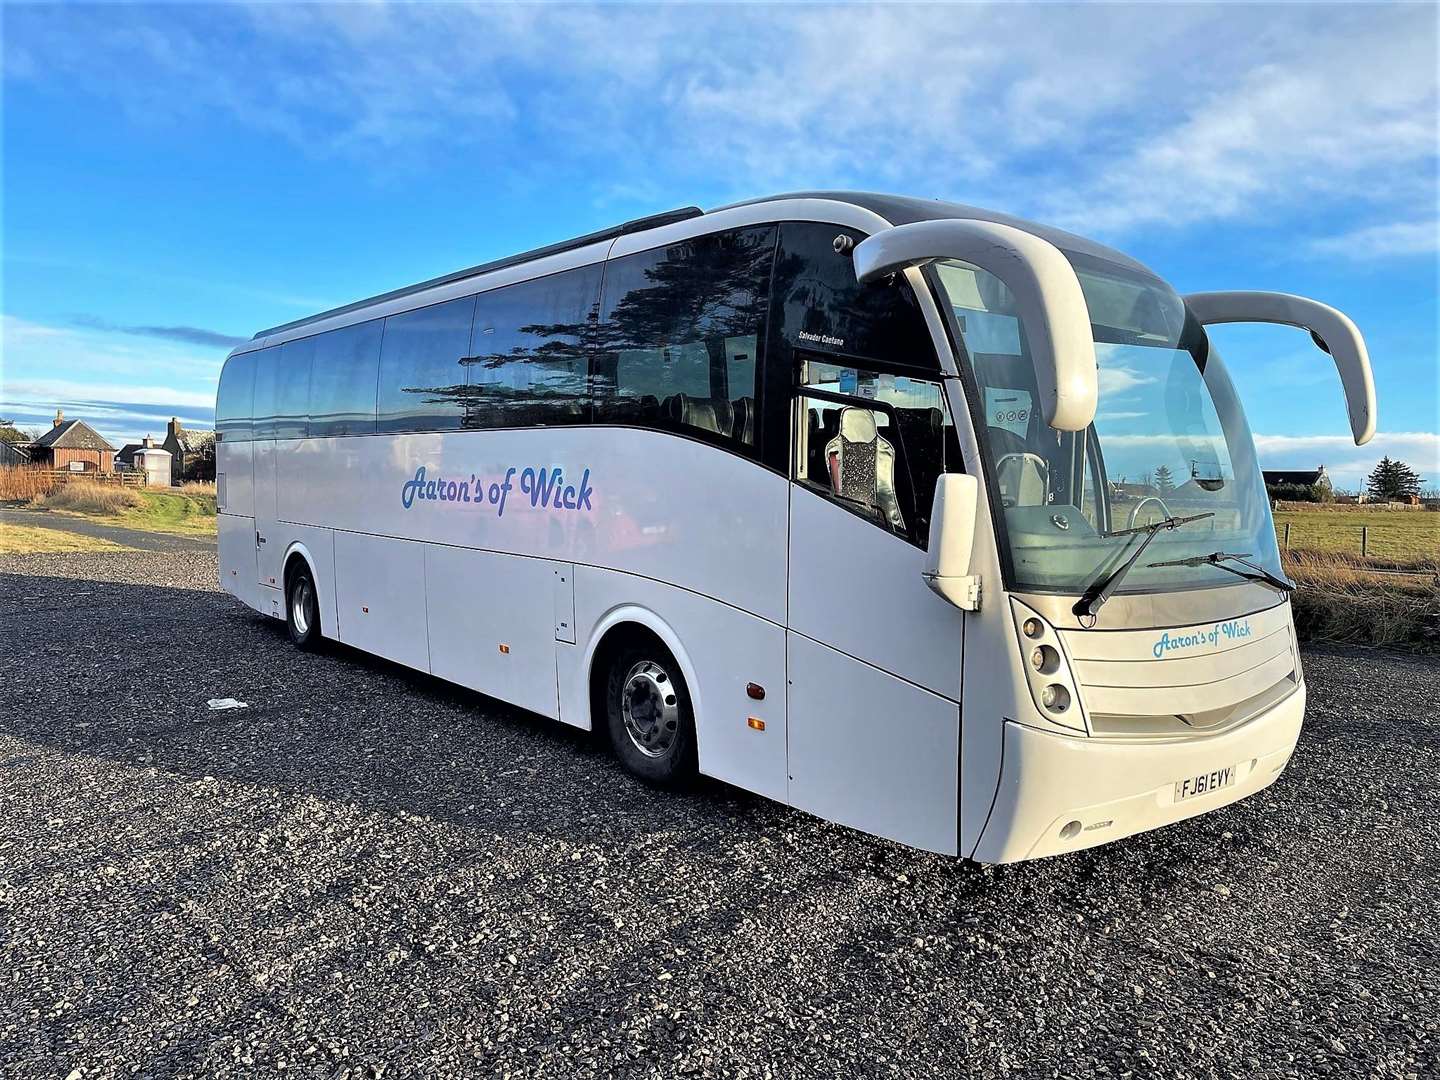 Aaron just purchased this bus and drove it up to Wick from Manchester last week. He says he always buys white buses which makes it easier for the livery to be painted on. Picture: Aaron Wilson